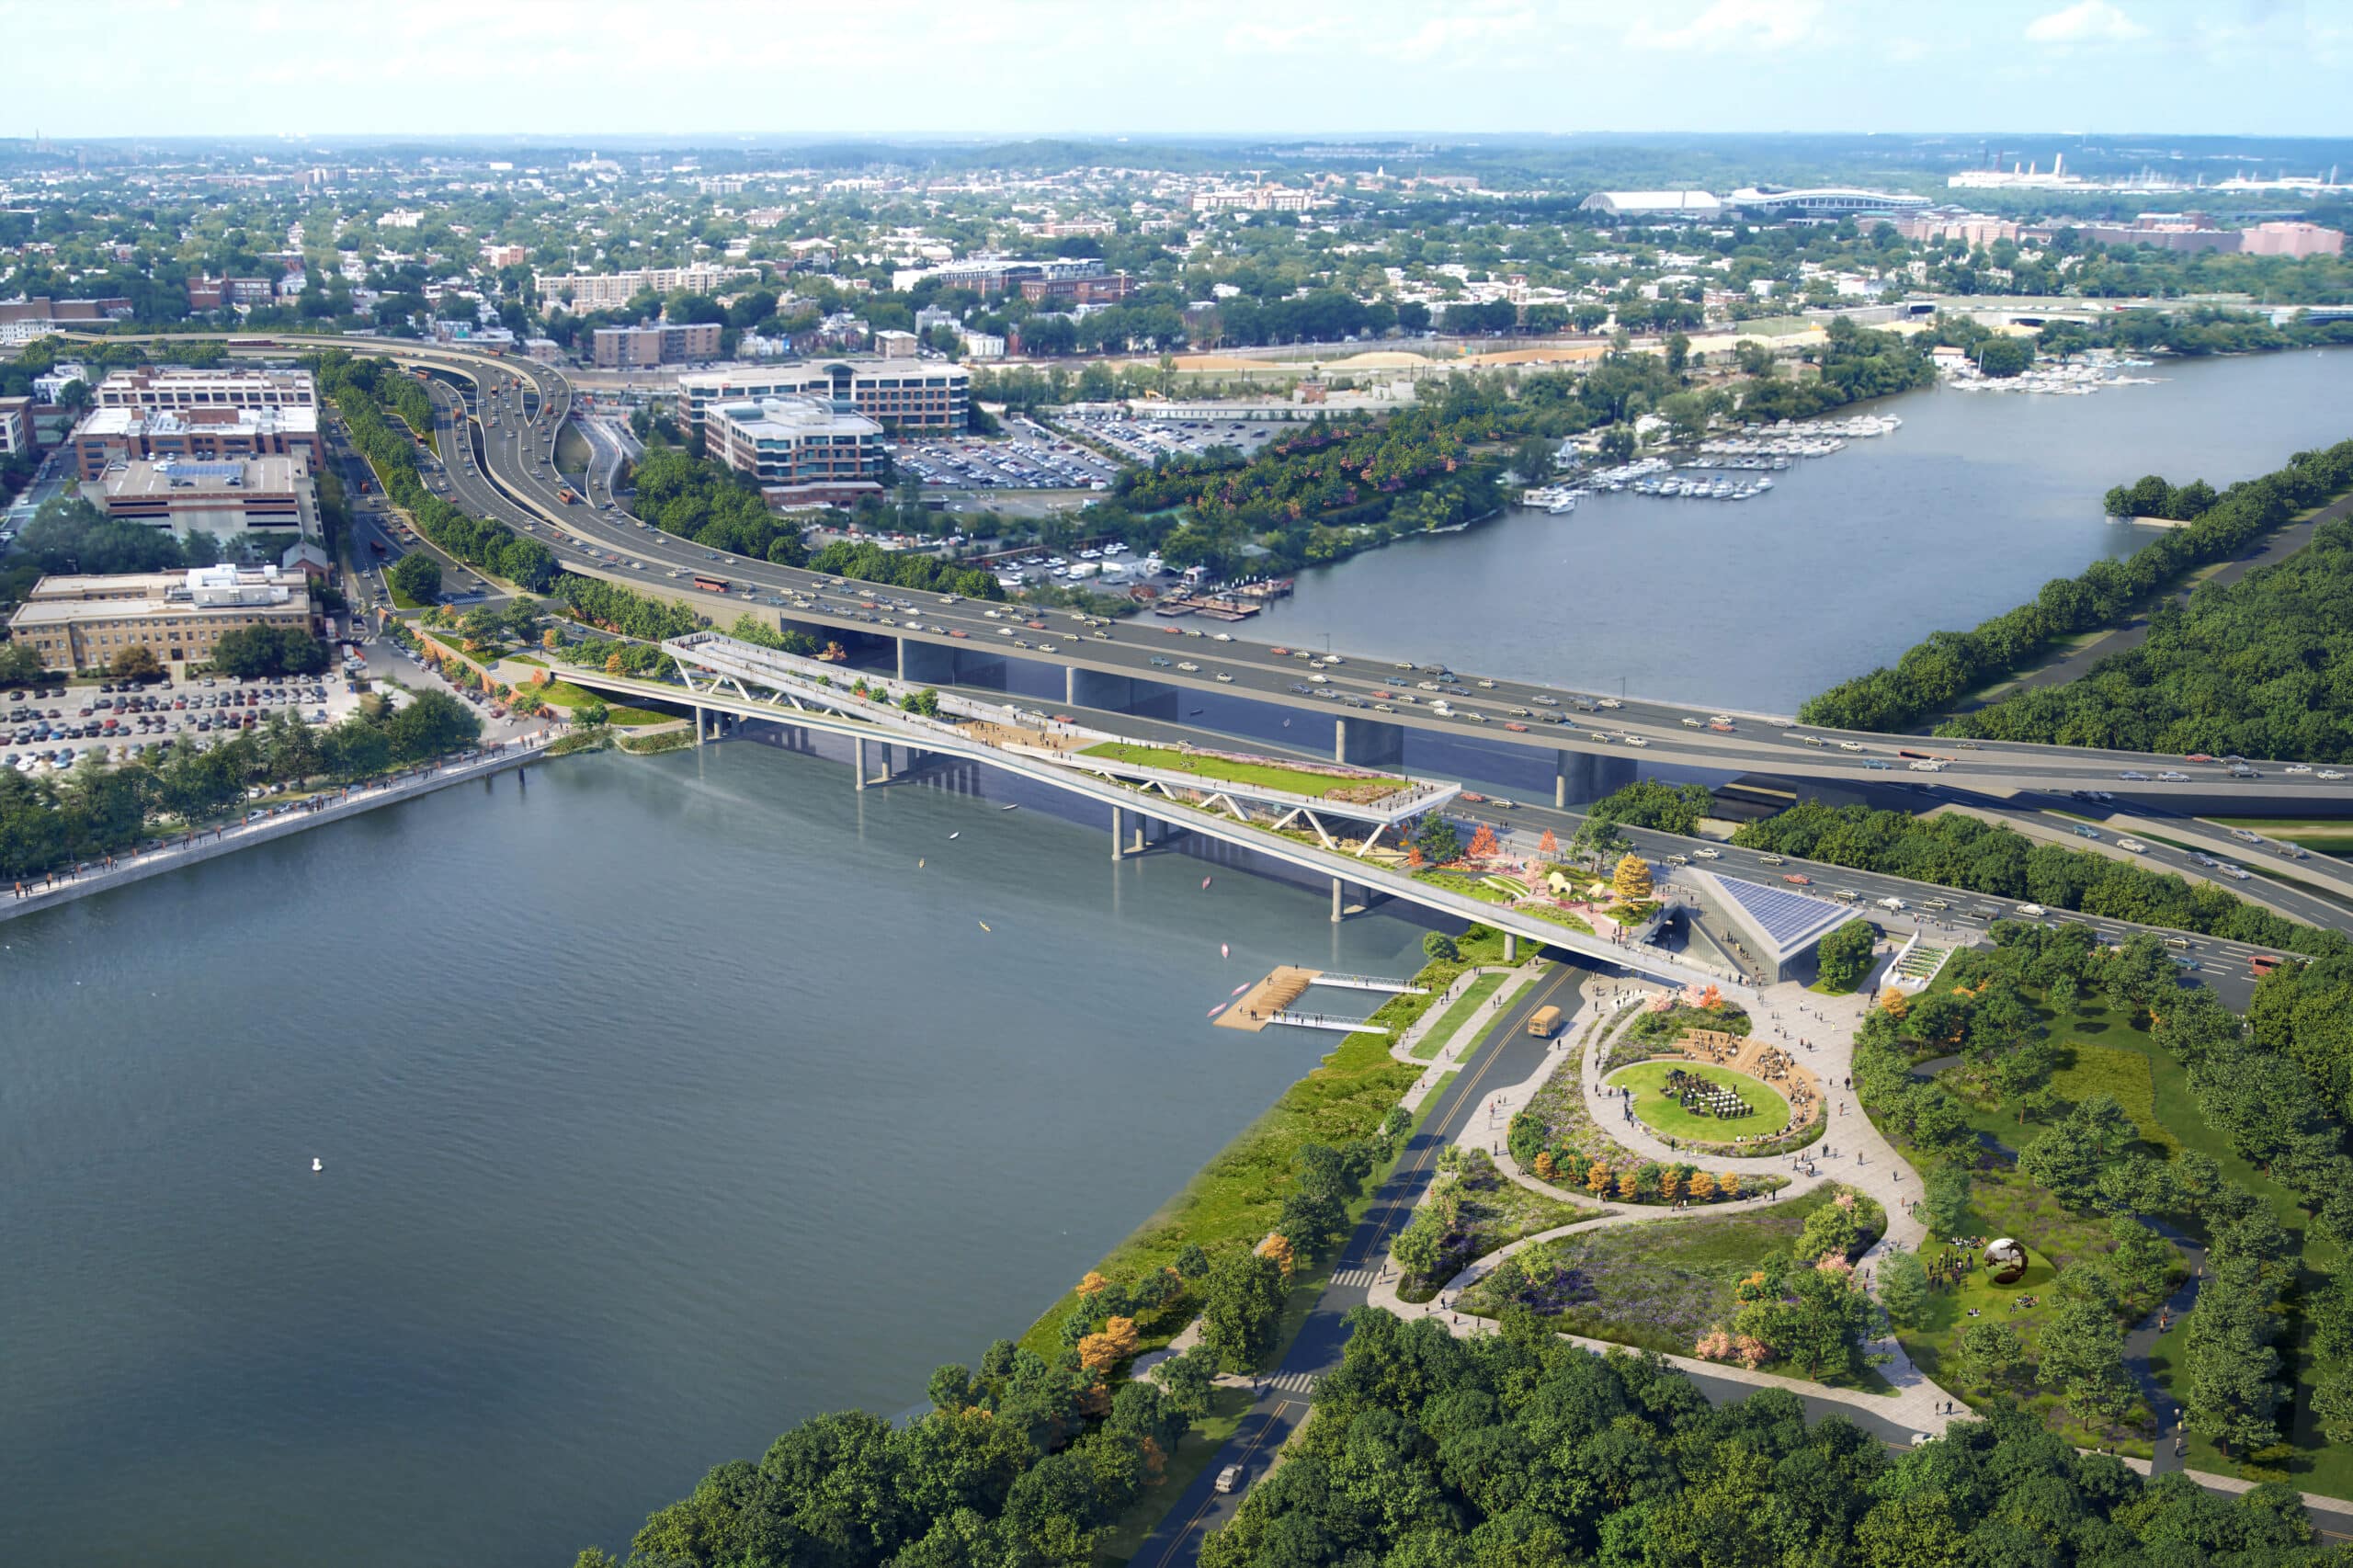 An aerial view of a bridge over a river, with the latest updates on the 11th Street Bridge Park project.